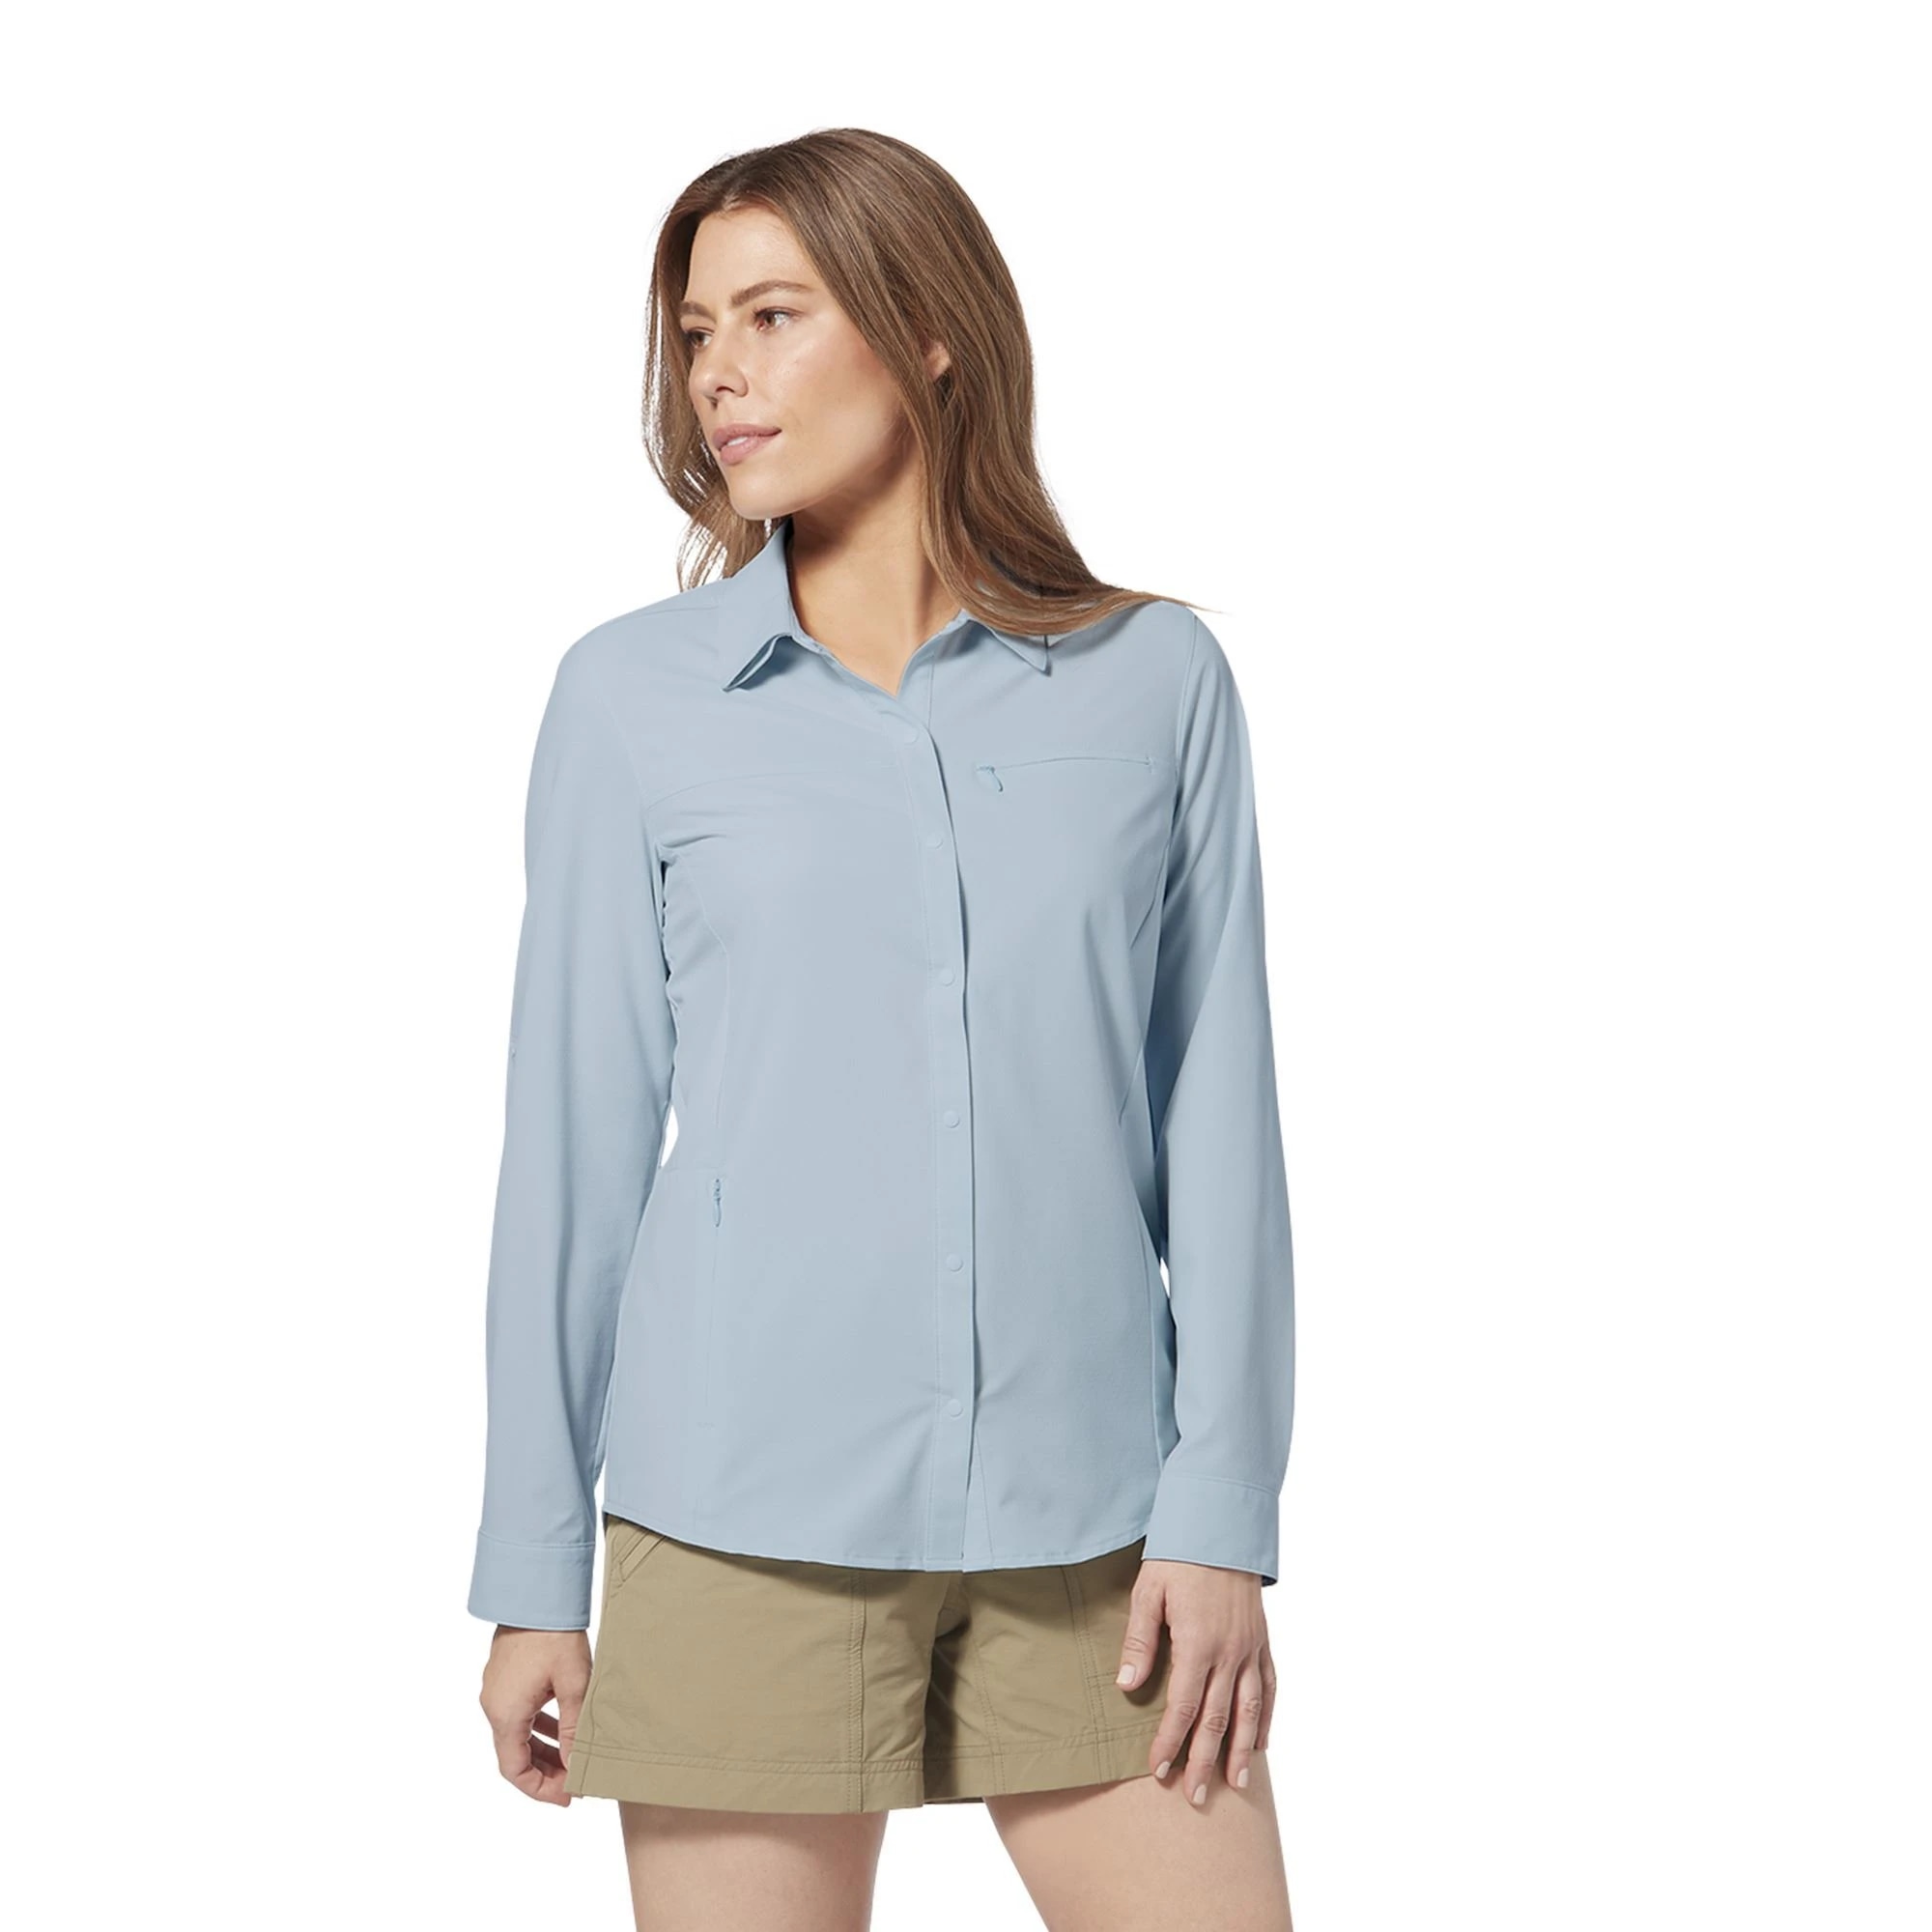 Women's Expedition Pro Long Sleeved Shirt